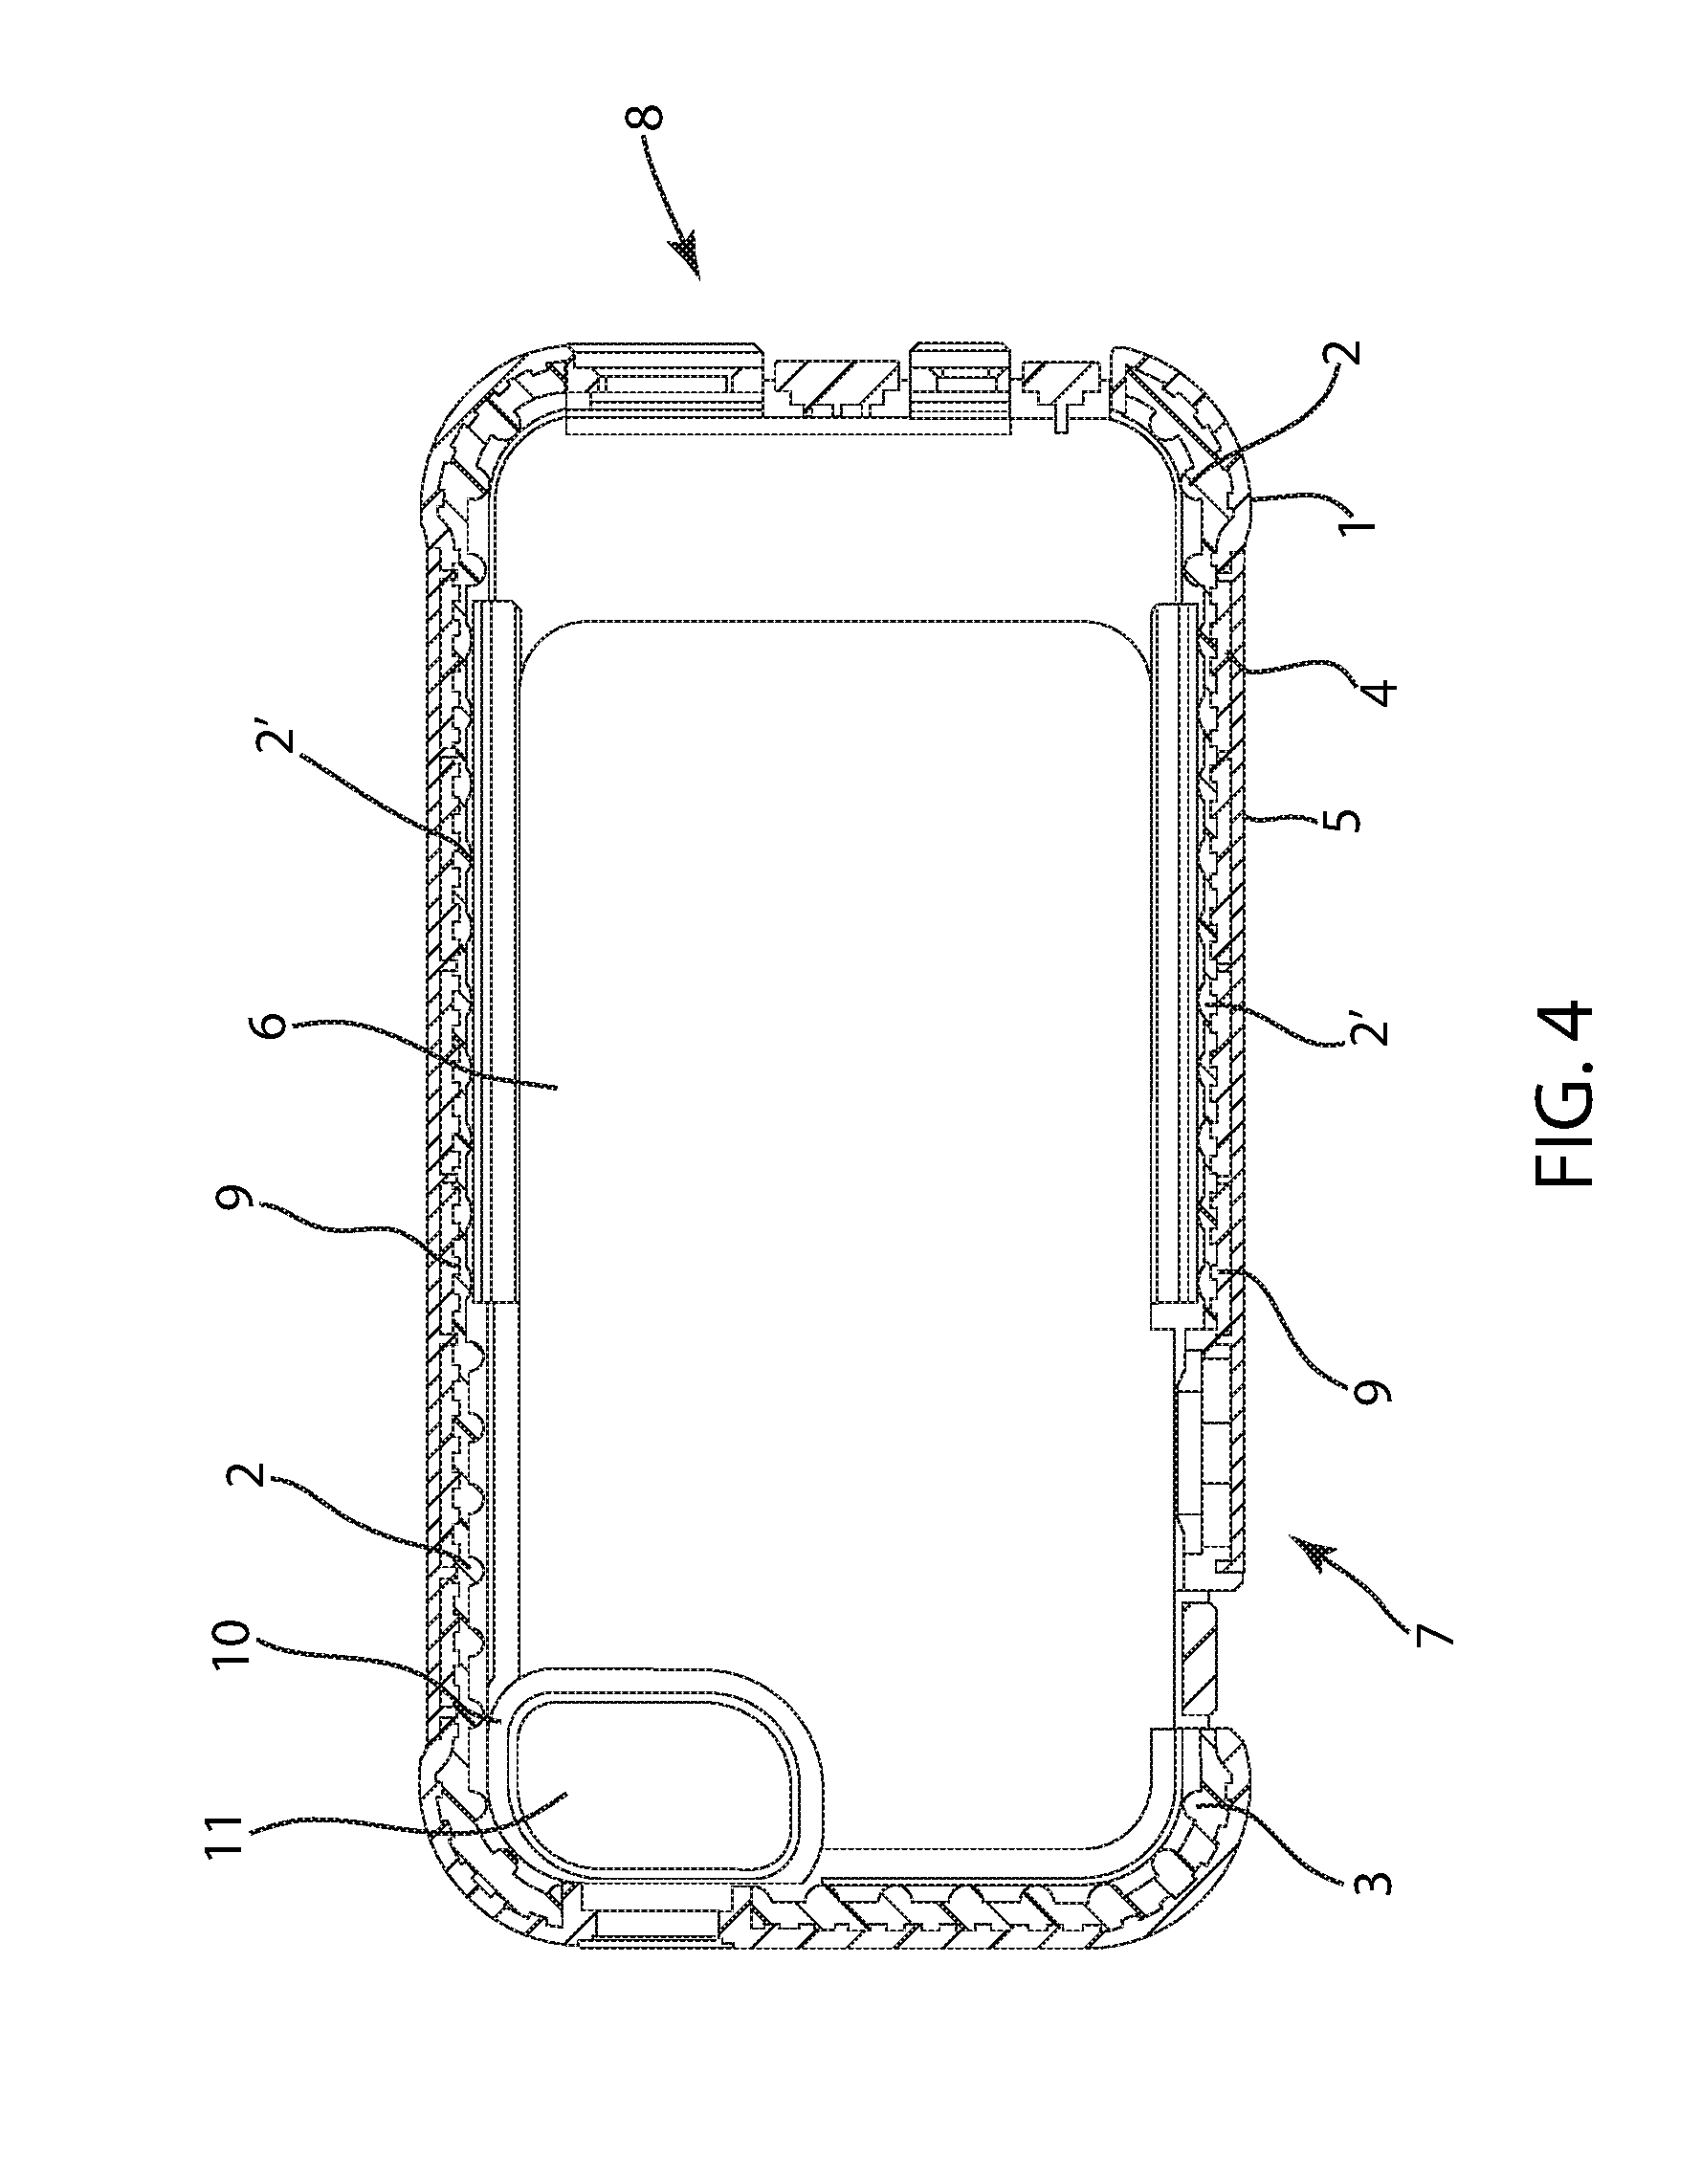 Case for a mobile device with a screen